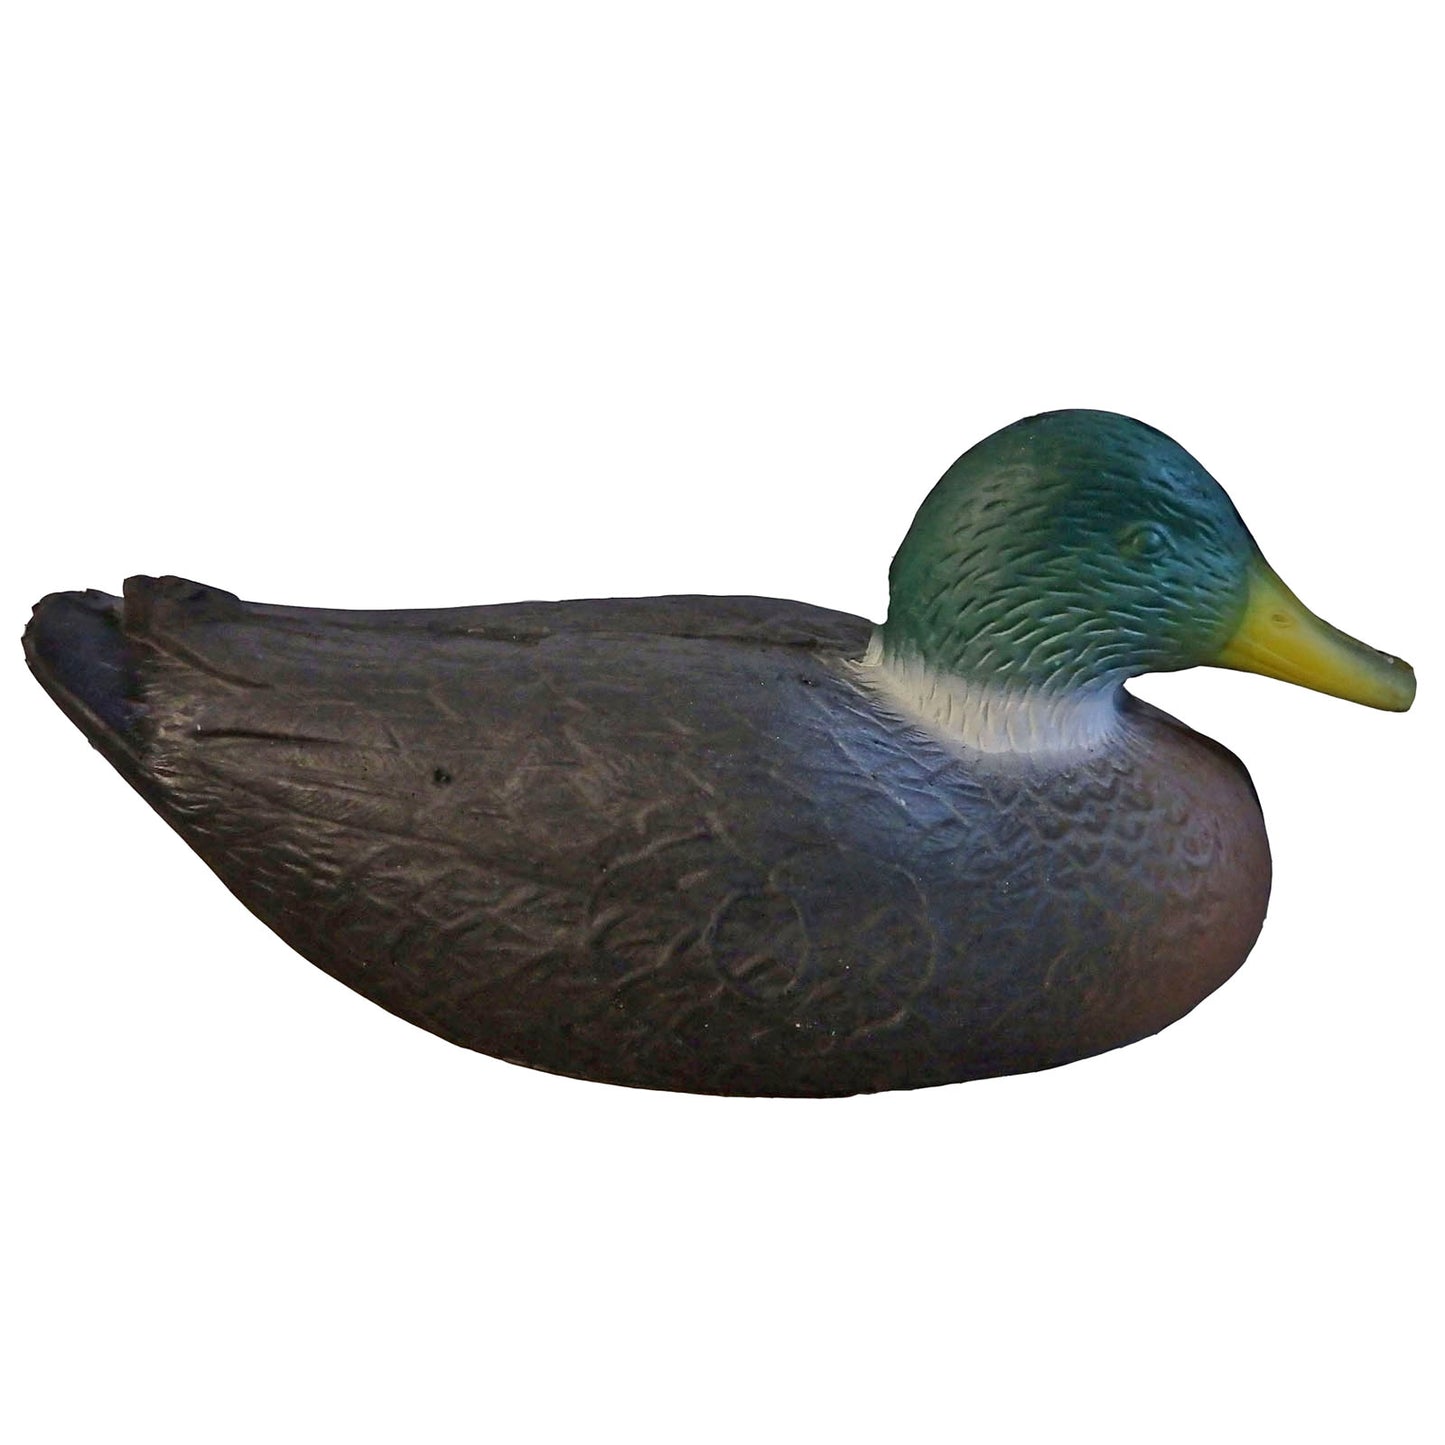 100277 Leitold Duck